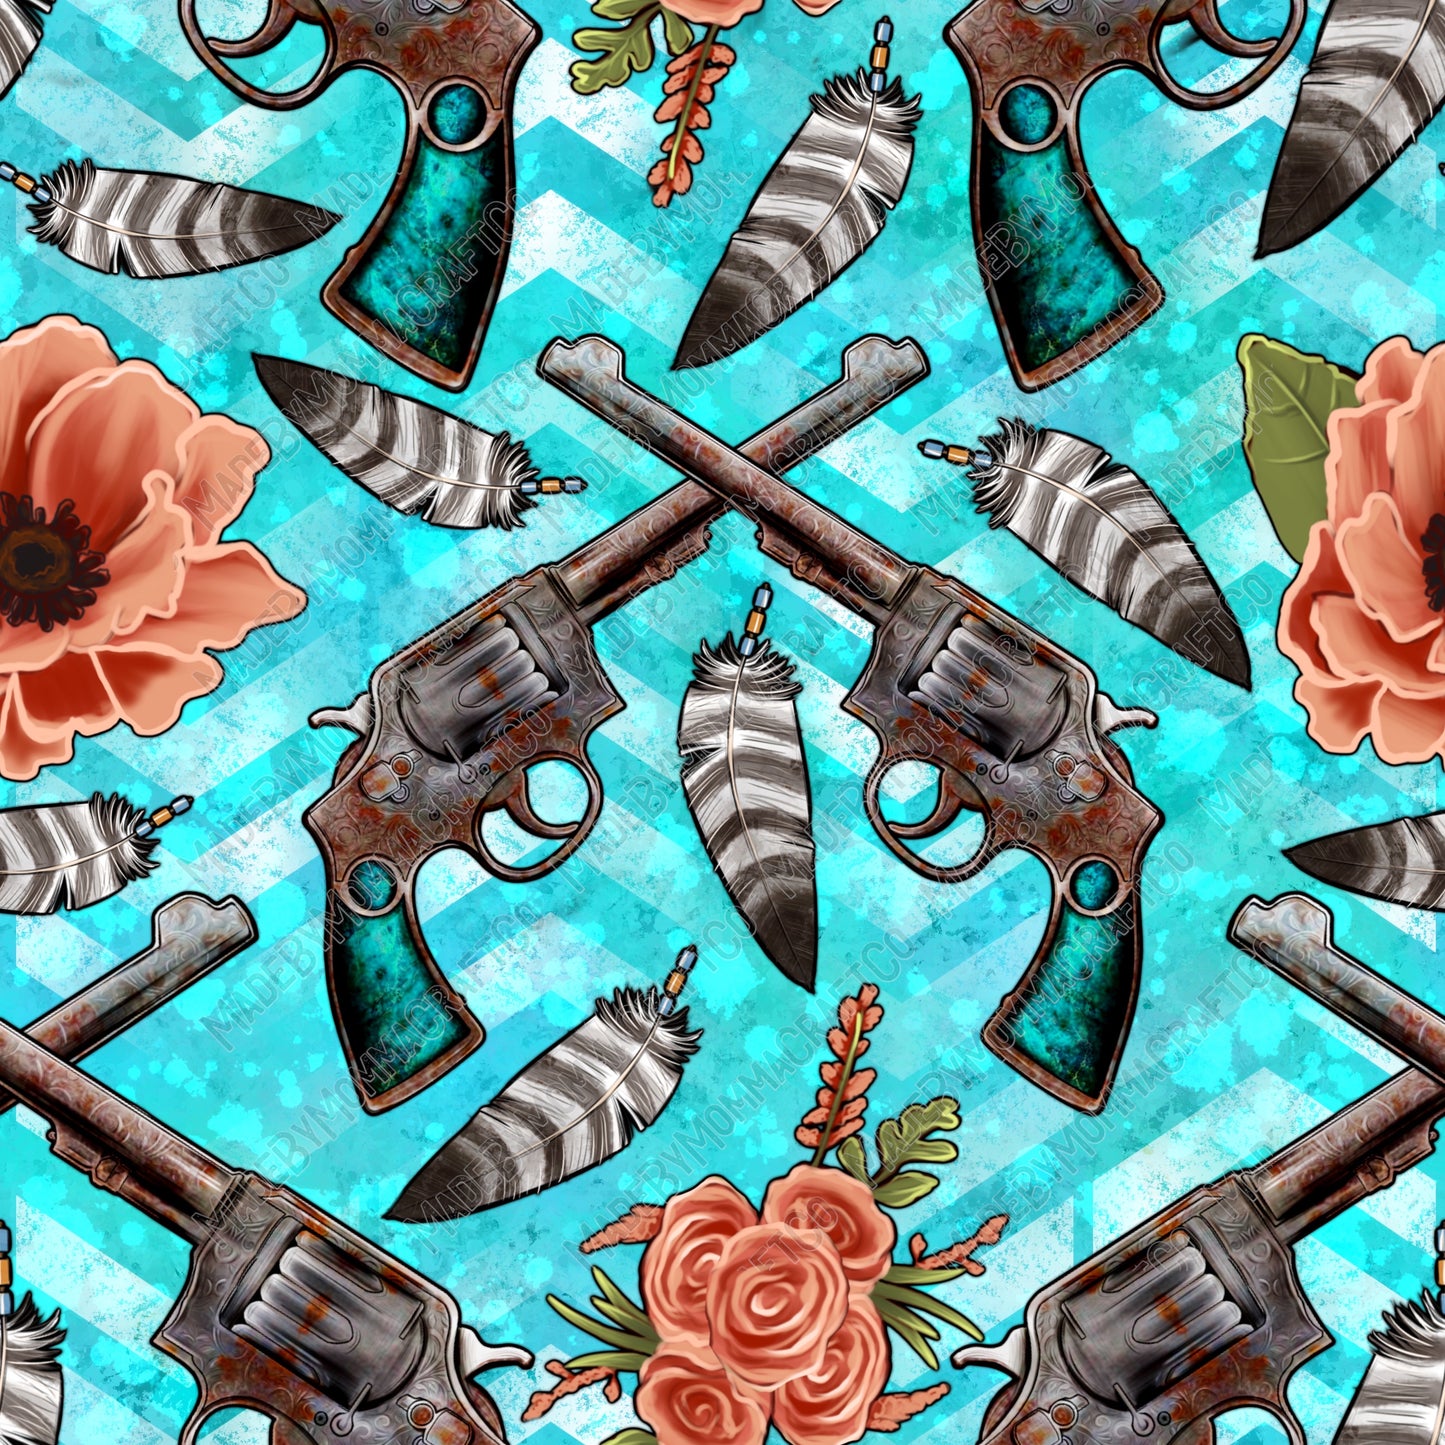 Western Cowboy Guns And Flowers With Feathers - Vinyl Or Waterslide Seamless Wrap